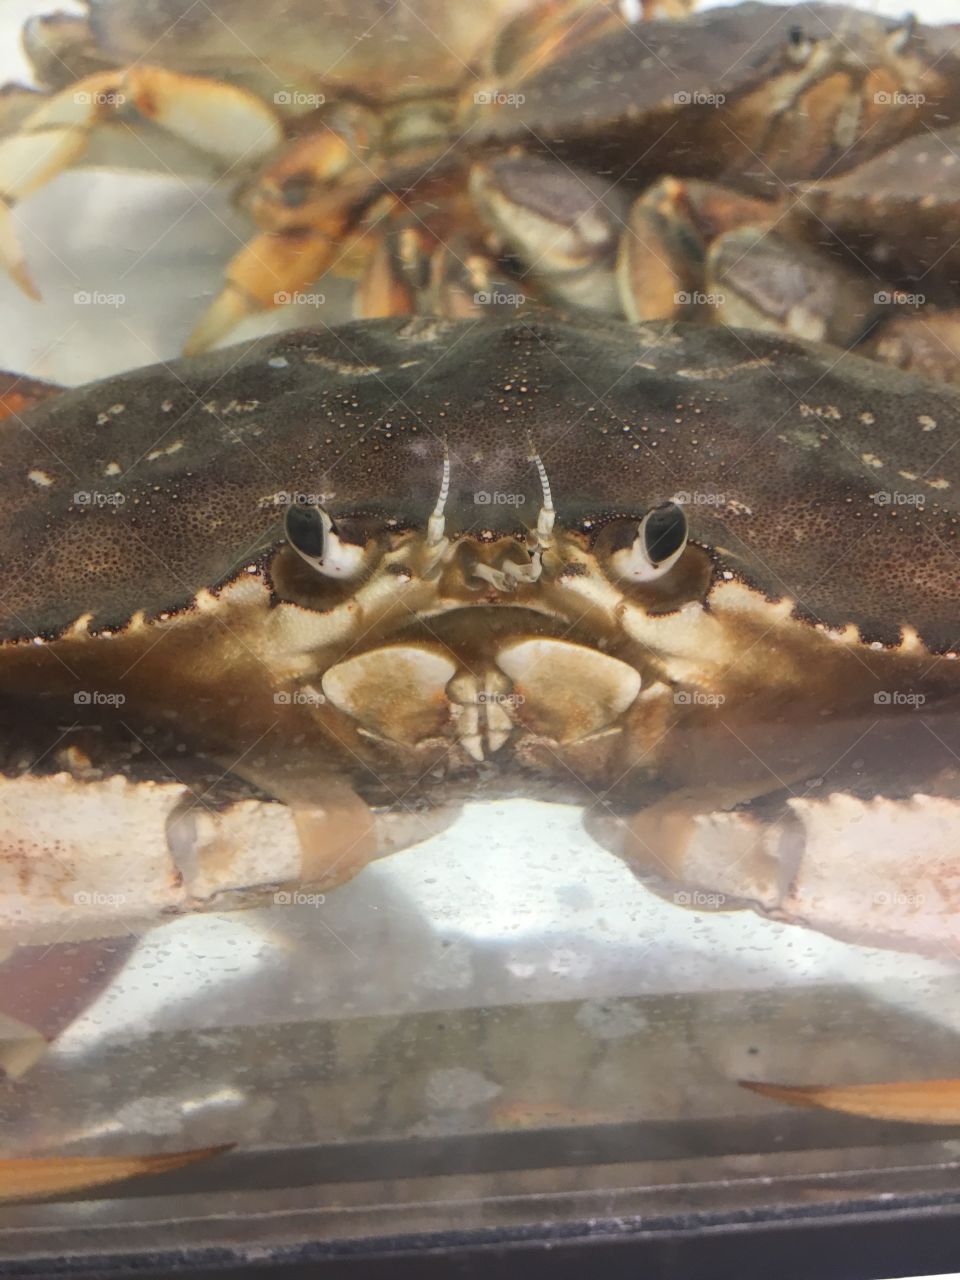 Angry looking crab